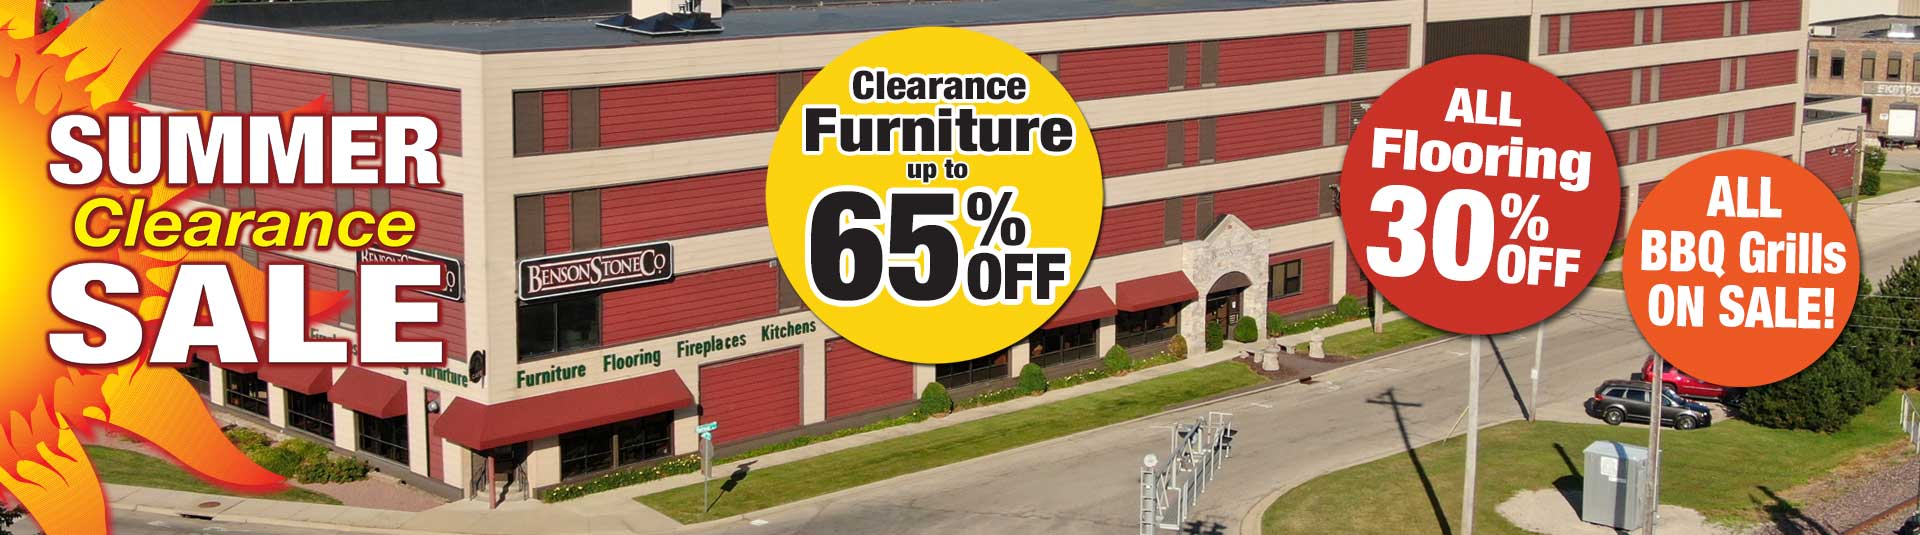 Up to 65% Off Furniture during the Summer Clearance Sale at Benson Stone Company! Plus, save on flooring, granite remants and bbq grills!